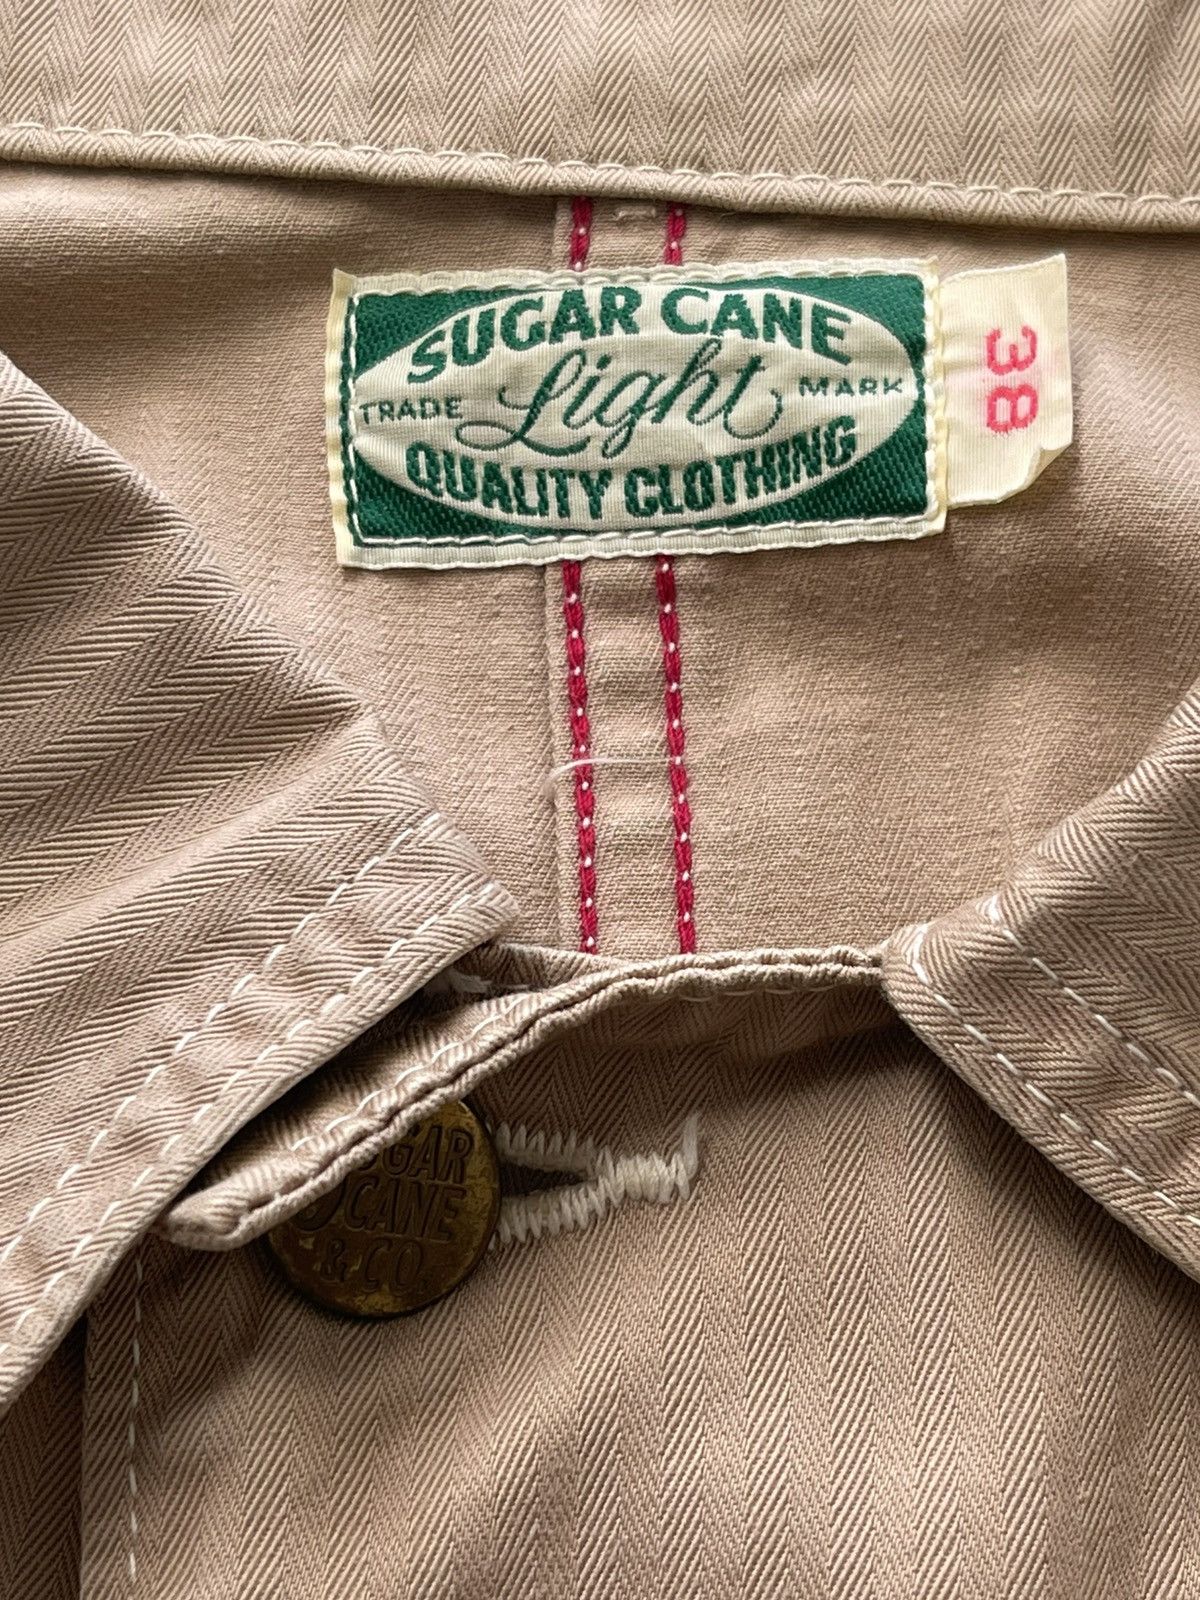 Workers Vintage Sugar Cane Workers Jacket Size US M / EU 48-50 / 2 - 5 Thumbnail